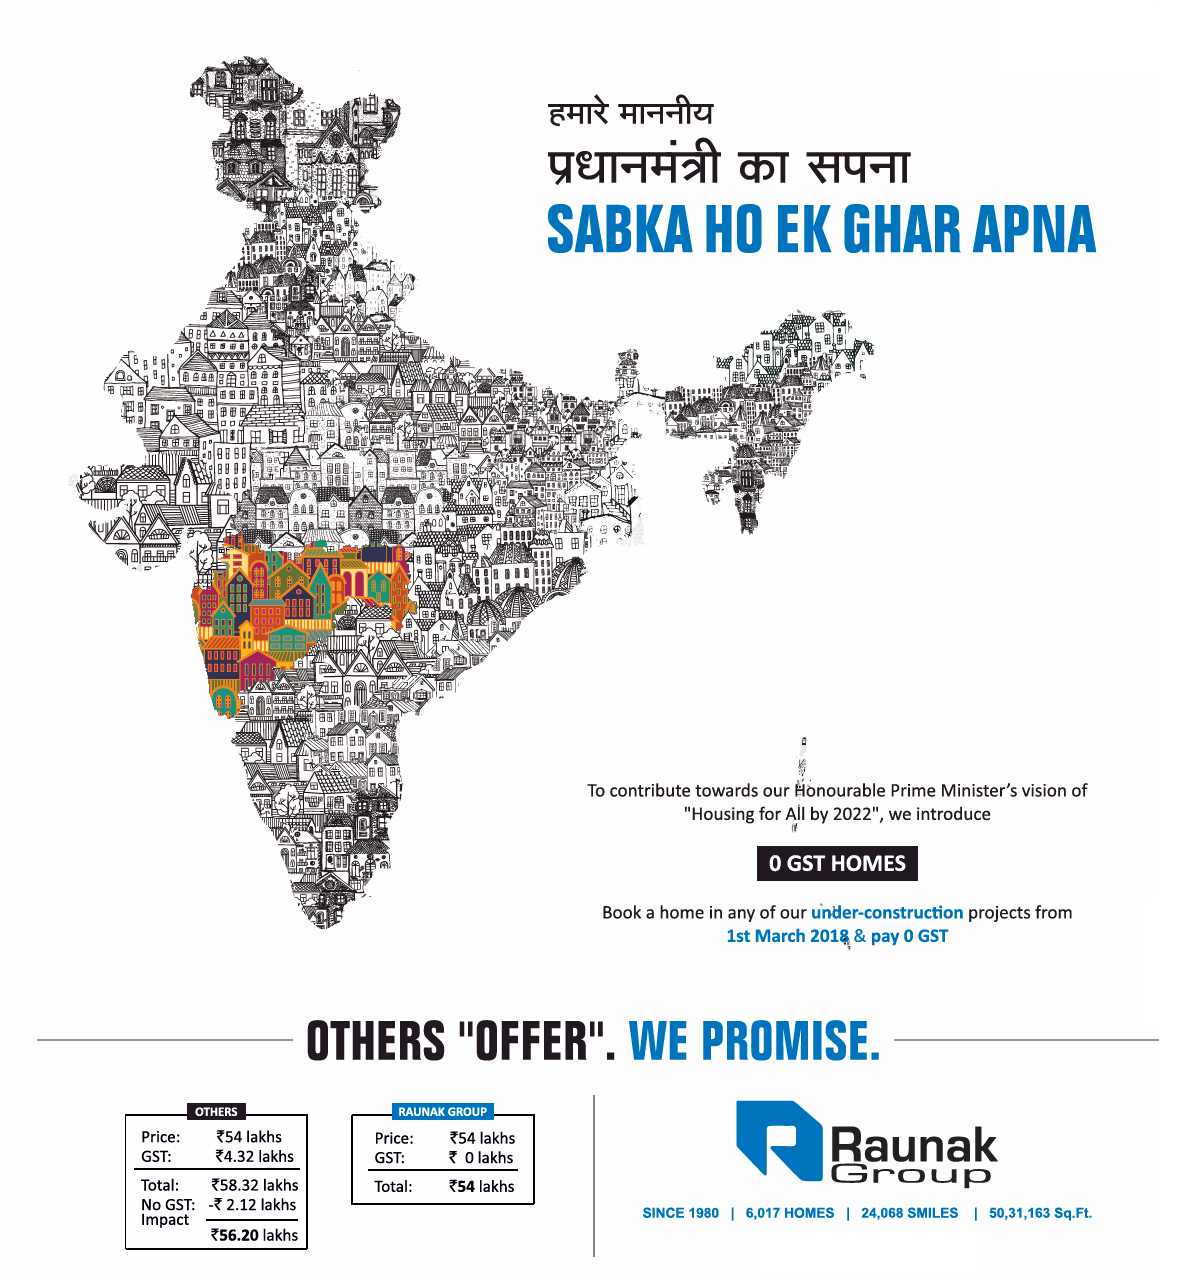 Book a home at any under construction projects of Raunak Group & pay Zero GST